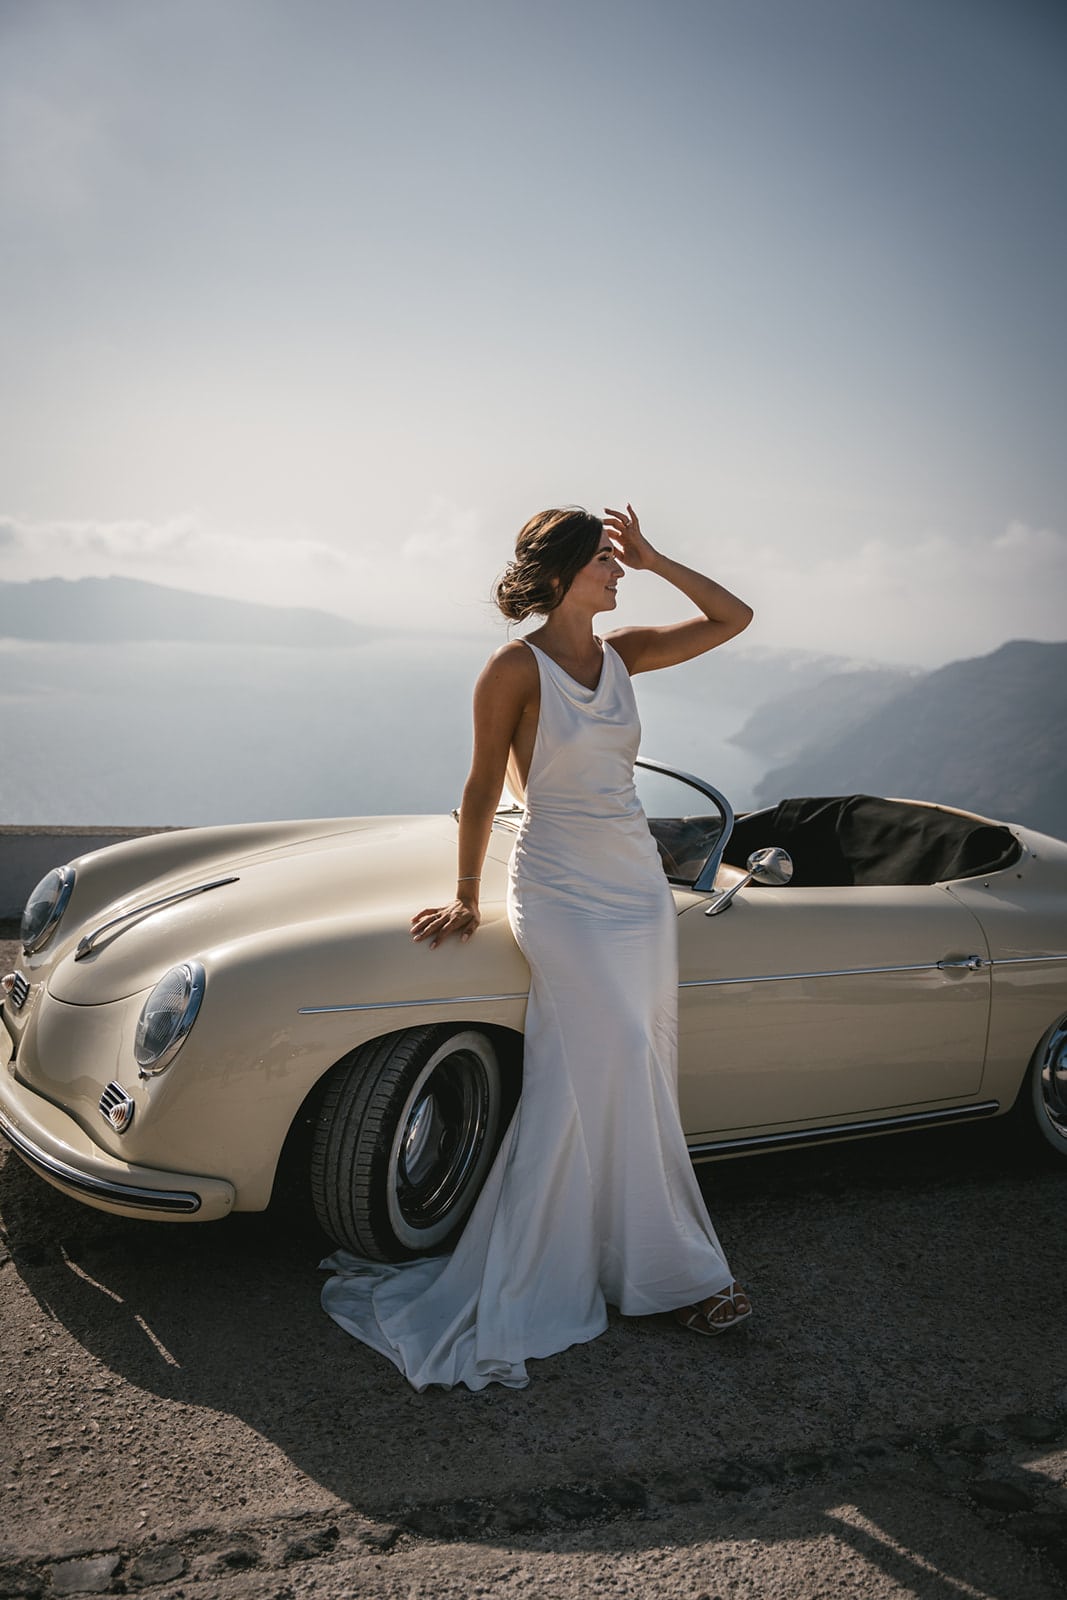 Beneath Santorini’s sky, by the sea, their vintage car awaits to whisk them to forever